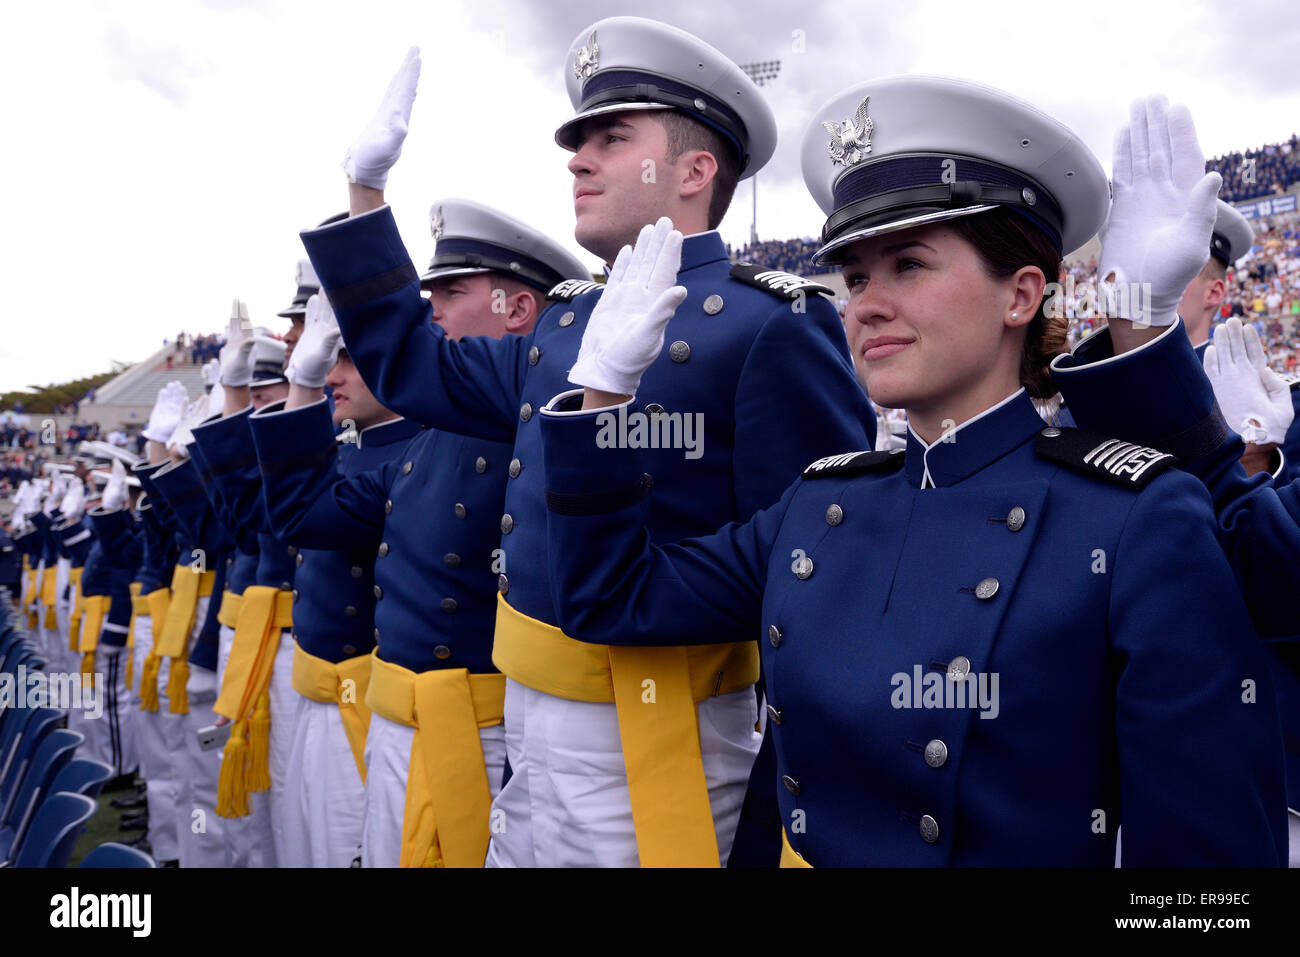 Cadets at the U.S. Air Force Academy Class of 2015 take the Oath of Office during commencement May 28, 2015 in Colorado Springs, Colorado. Stock Photo